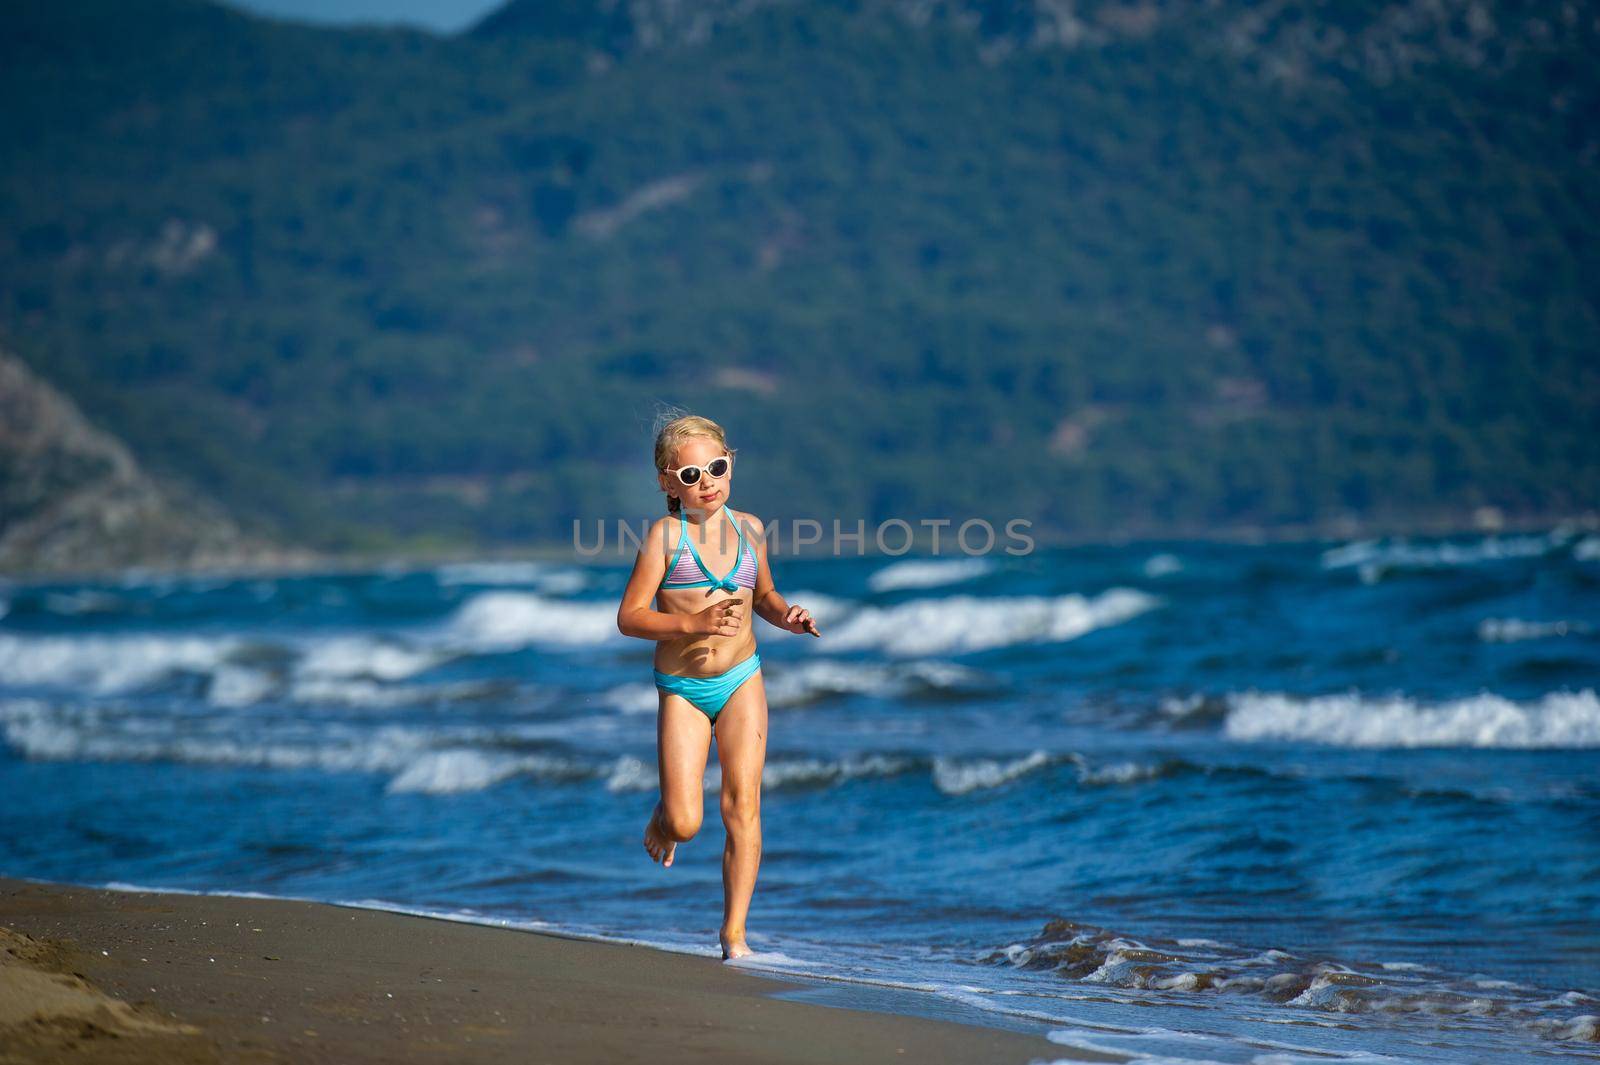 A little girl in a blue swimsuit and glasses runs on a Mediterranean beach in Turkey.